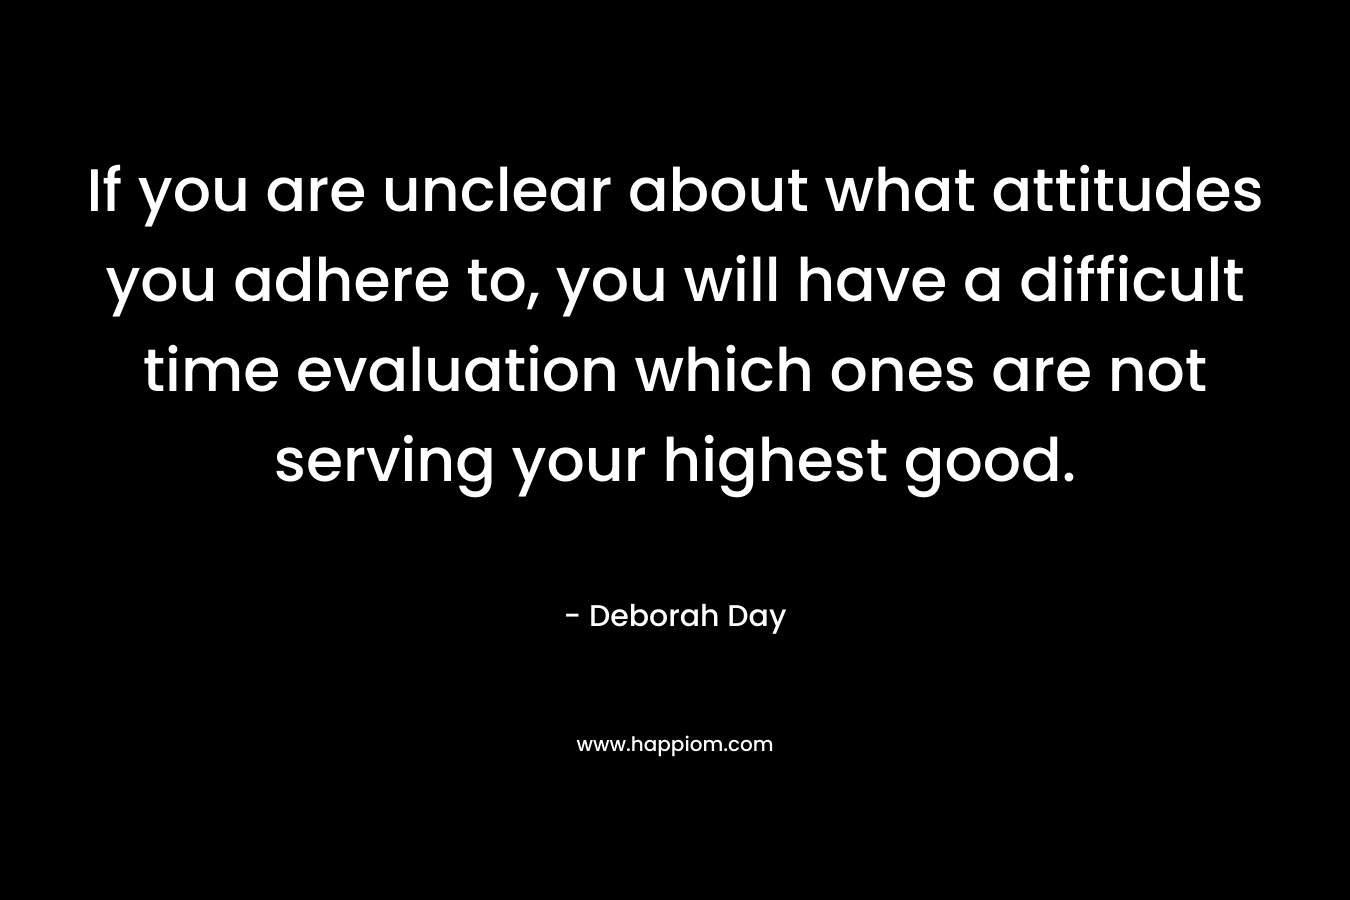 If you are unclear about what attitudes you adhere to, you will have a difficult time evaluation which ones are not serving your highest good.